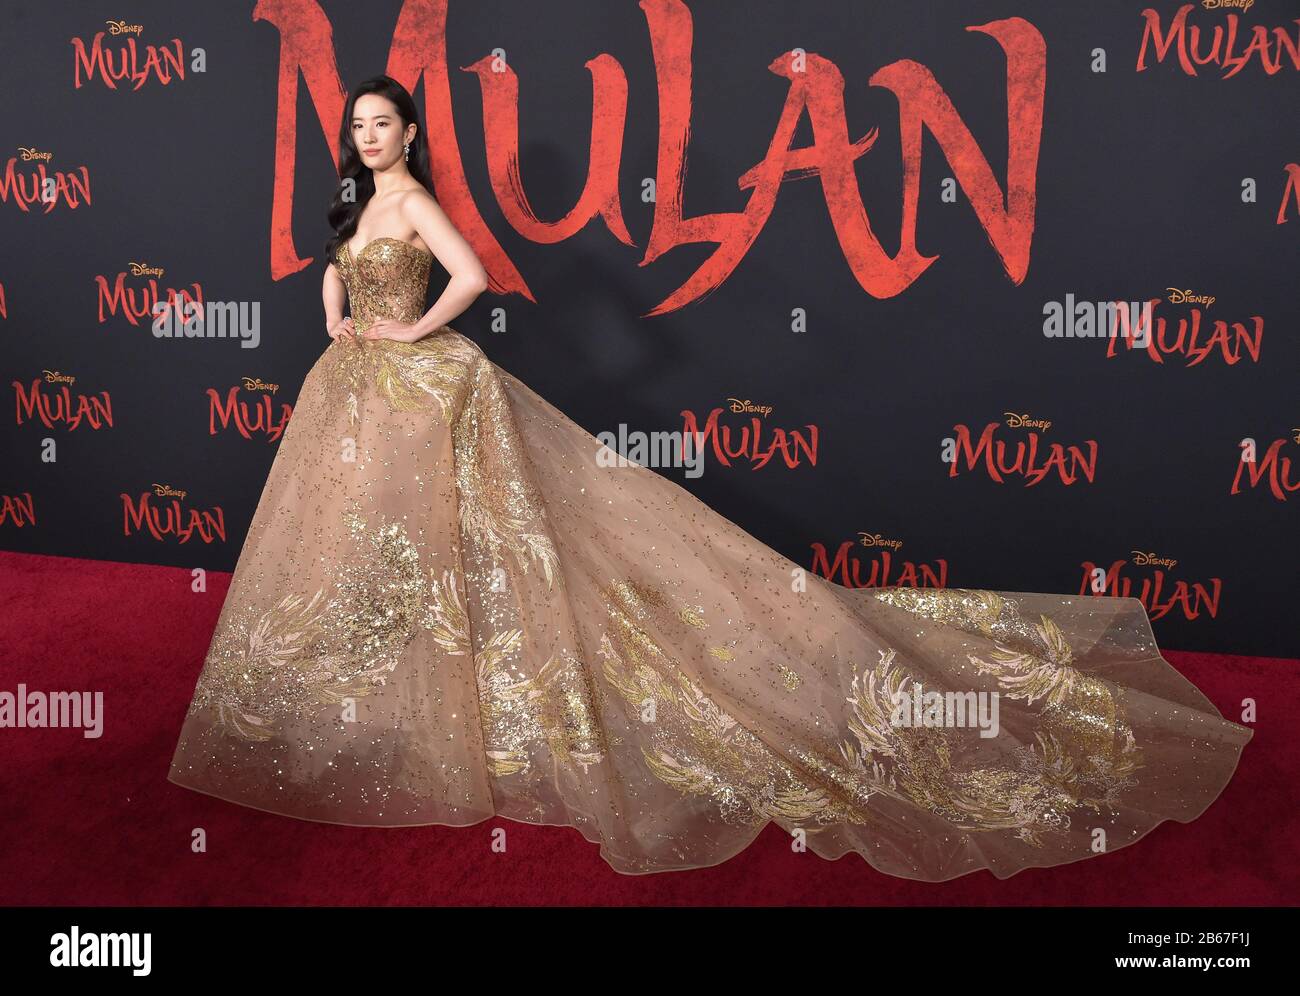 March 9, 2020, Hollywood, California, USA: Actress LIU YIFEI during red carpet arrivals for the premiere of the film 'Mulan' at the Dolby Theatre. (Credit Image: © Lisa O'Connor/ZUMA Wire) Stock Photo